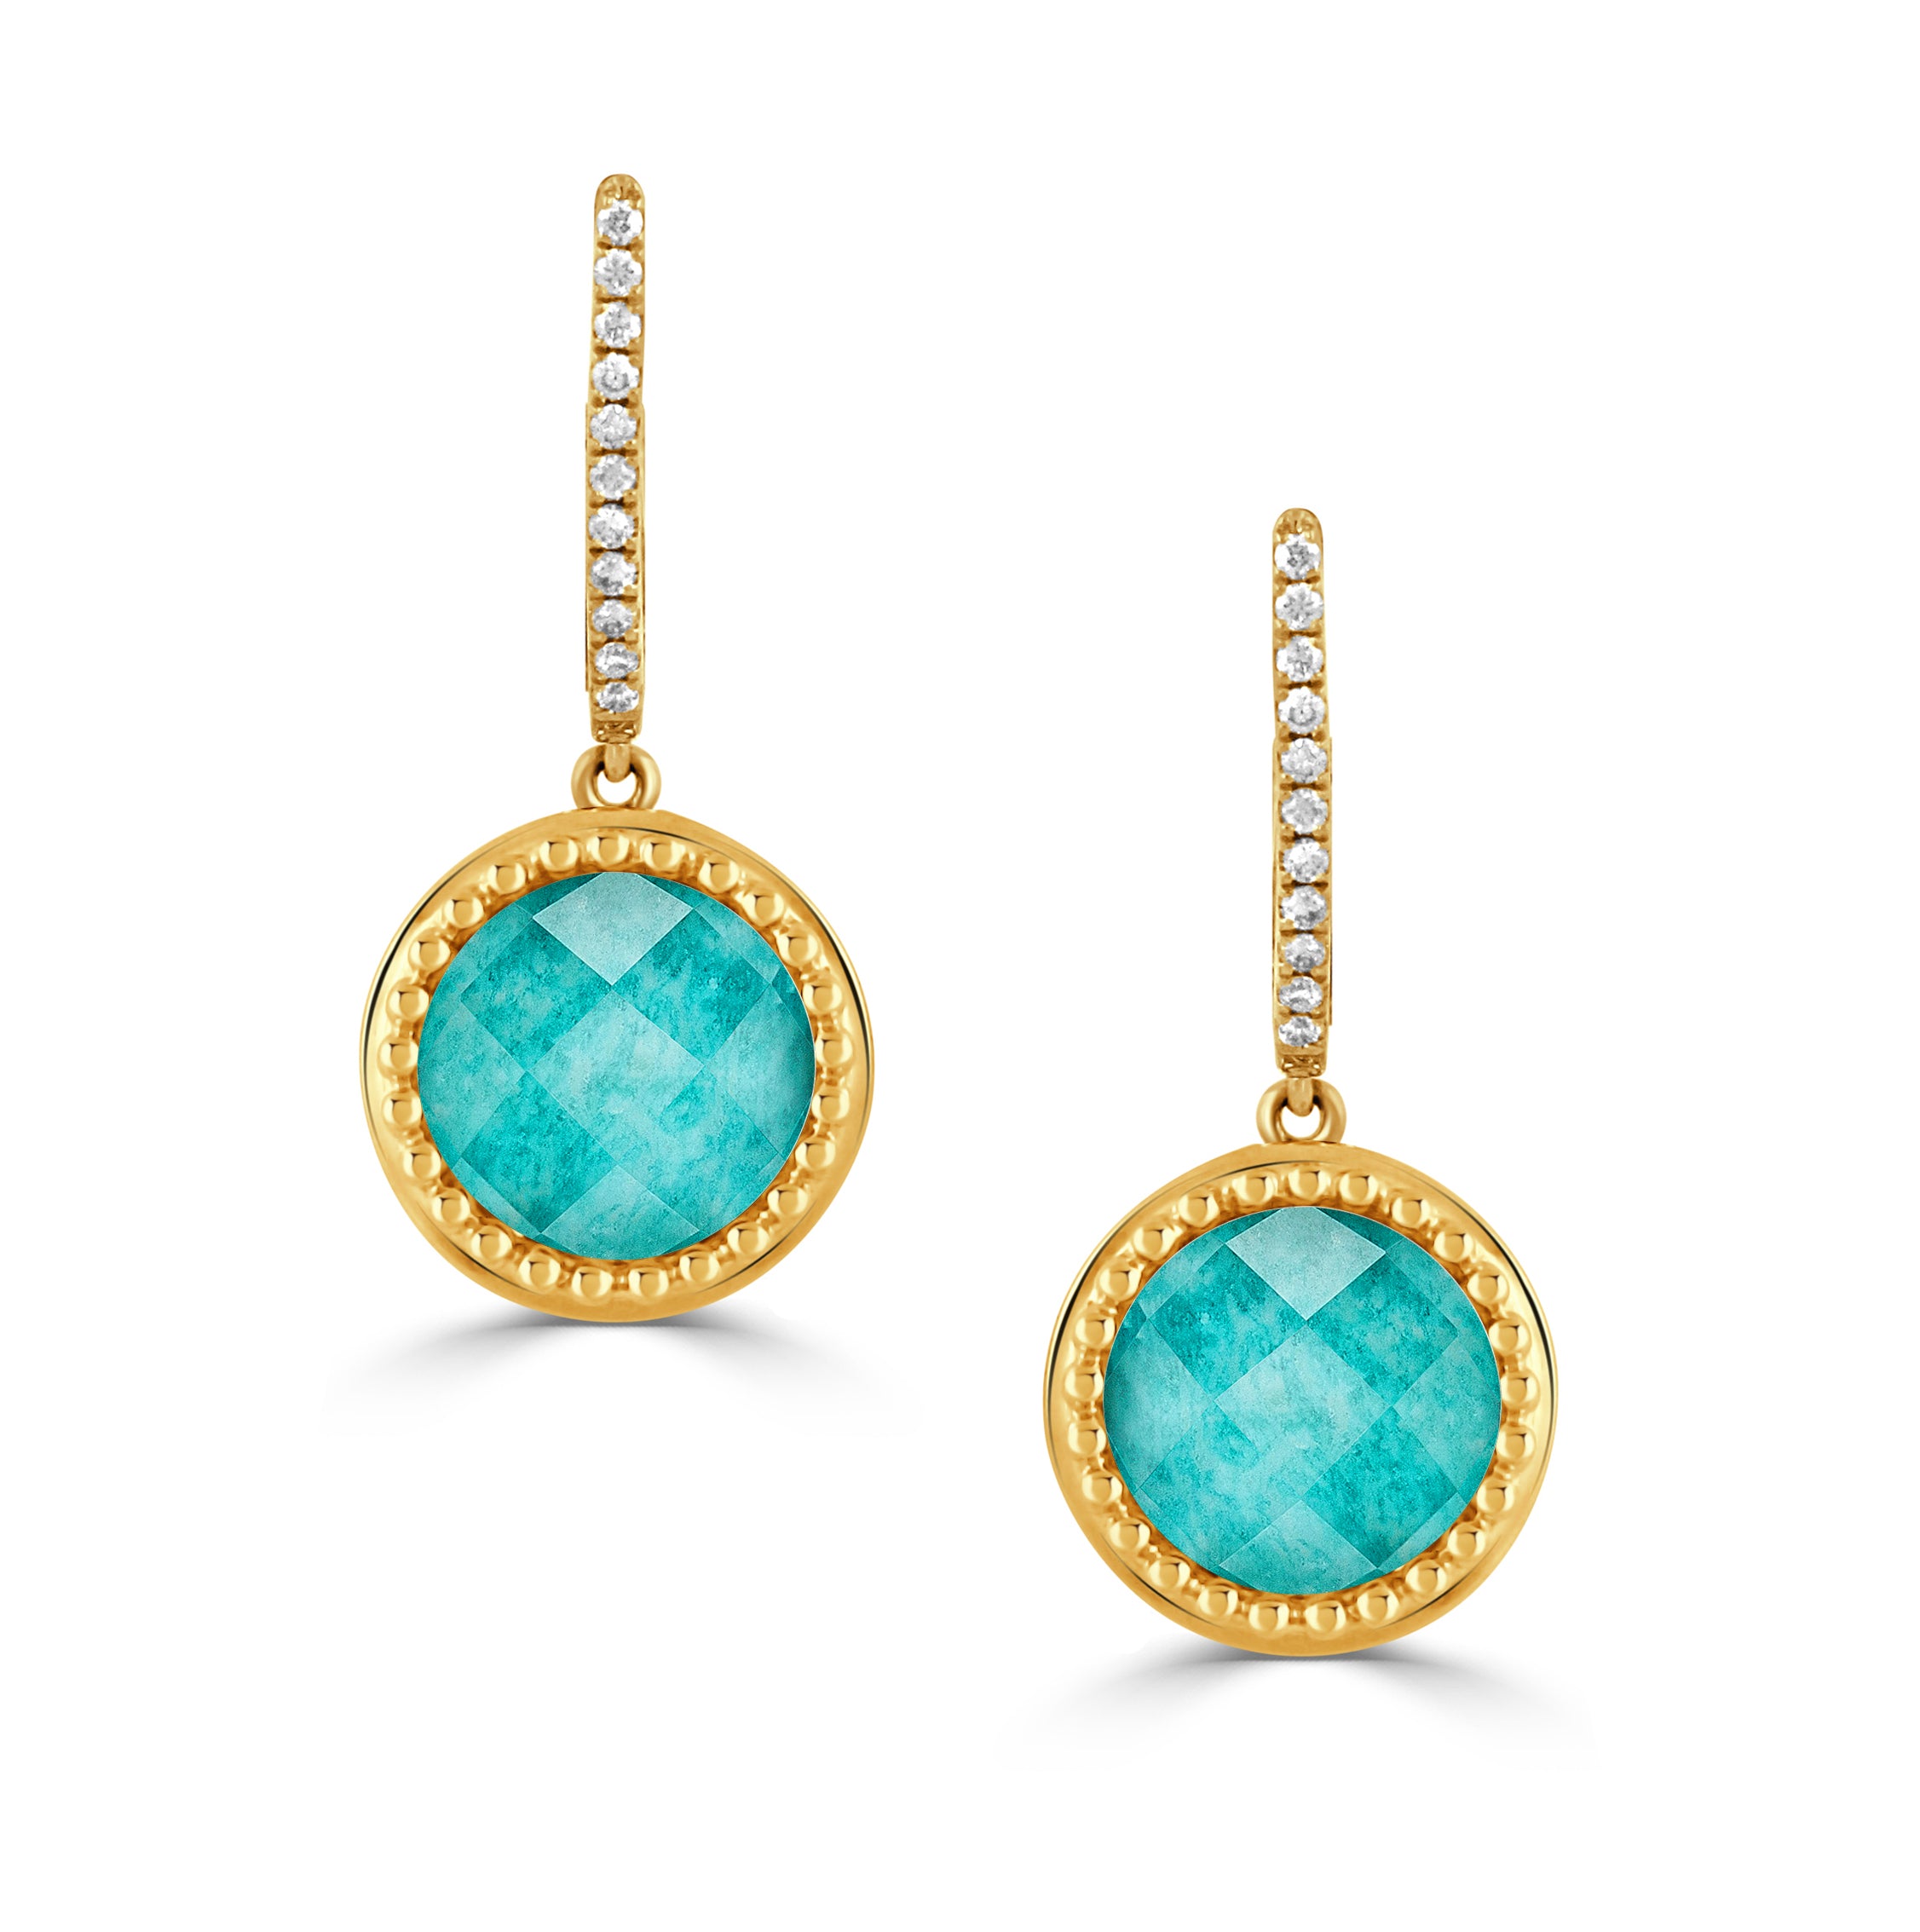 18K YELLOW GOLD DIAMOND DROP EARRINGS WITH CLEAR QUARTZ OVER AMAZONITE